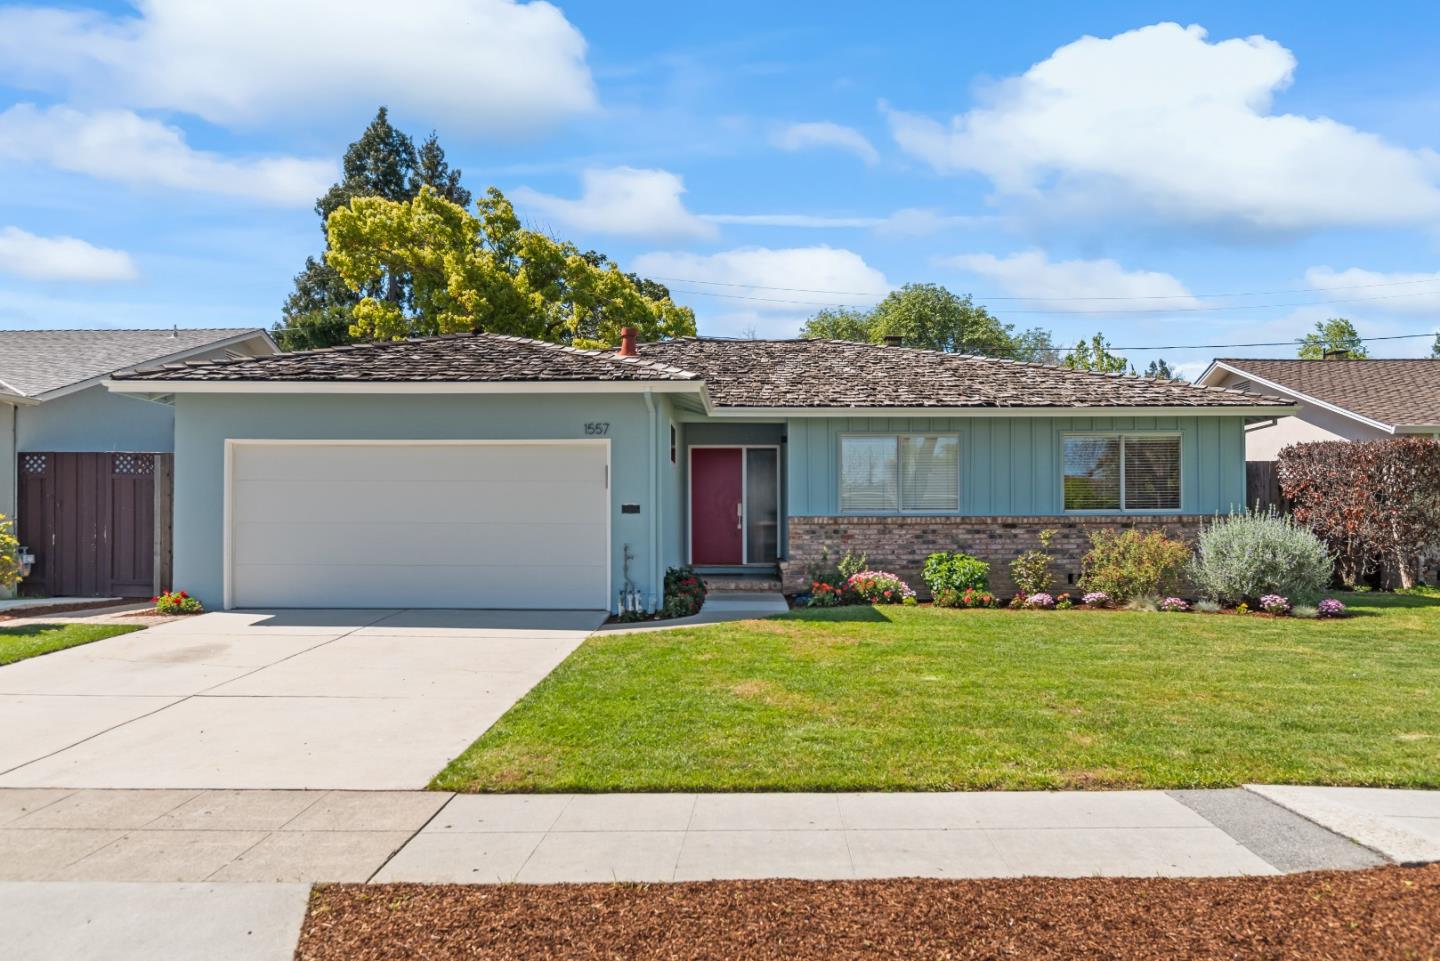 1557 Waxwing Ave, Sunnyvale, CA 94087